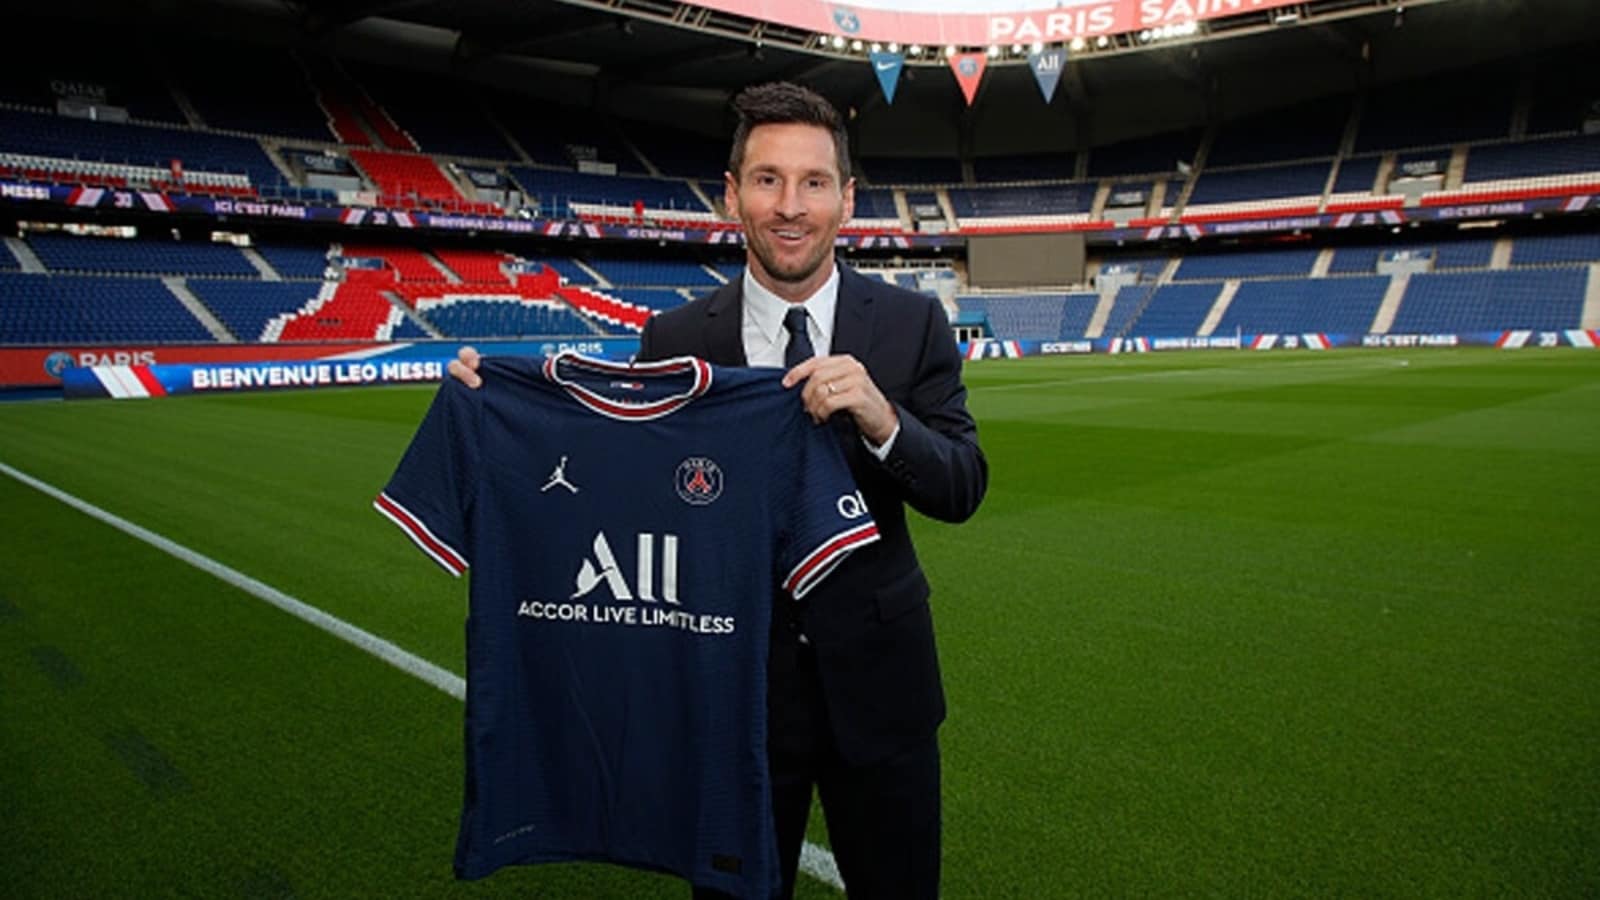 Lionel Messi Joins Paris Saint Germain On Two Year Deal After Barcelona Exit